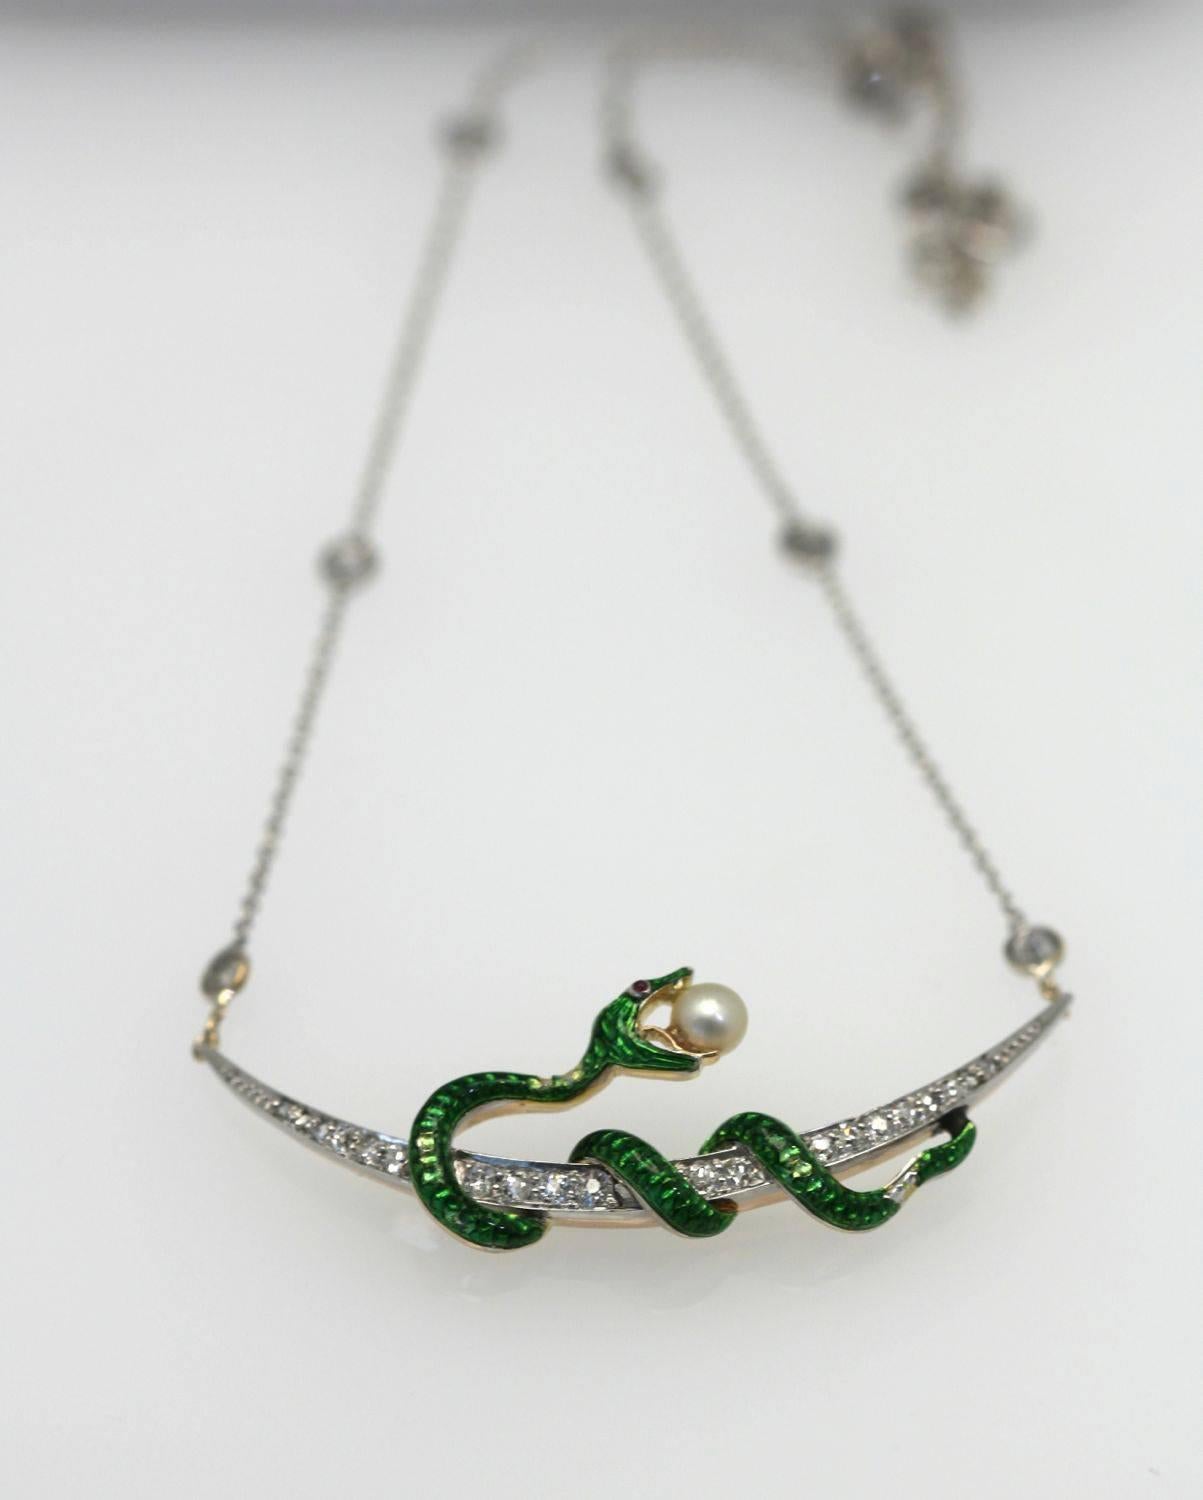 Diamond Crescent Necklace with Snake holding a pearl on a diamond studded chain.  There is slight loss to the green enamel but it does not distract from the beauty of this piece.  This started as a brooch but is was small so turned into a necklace. 